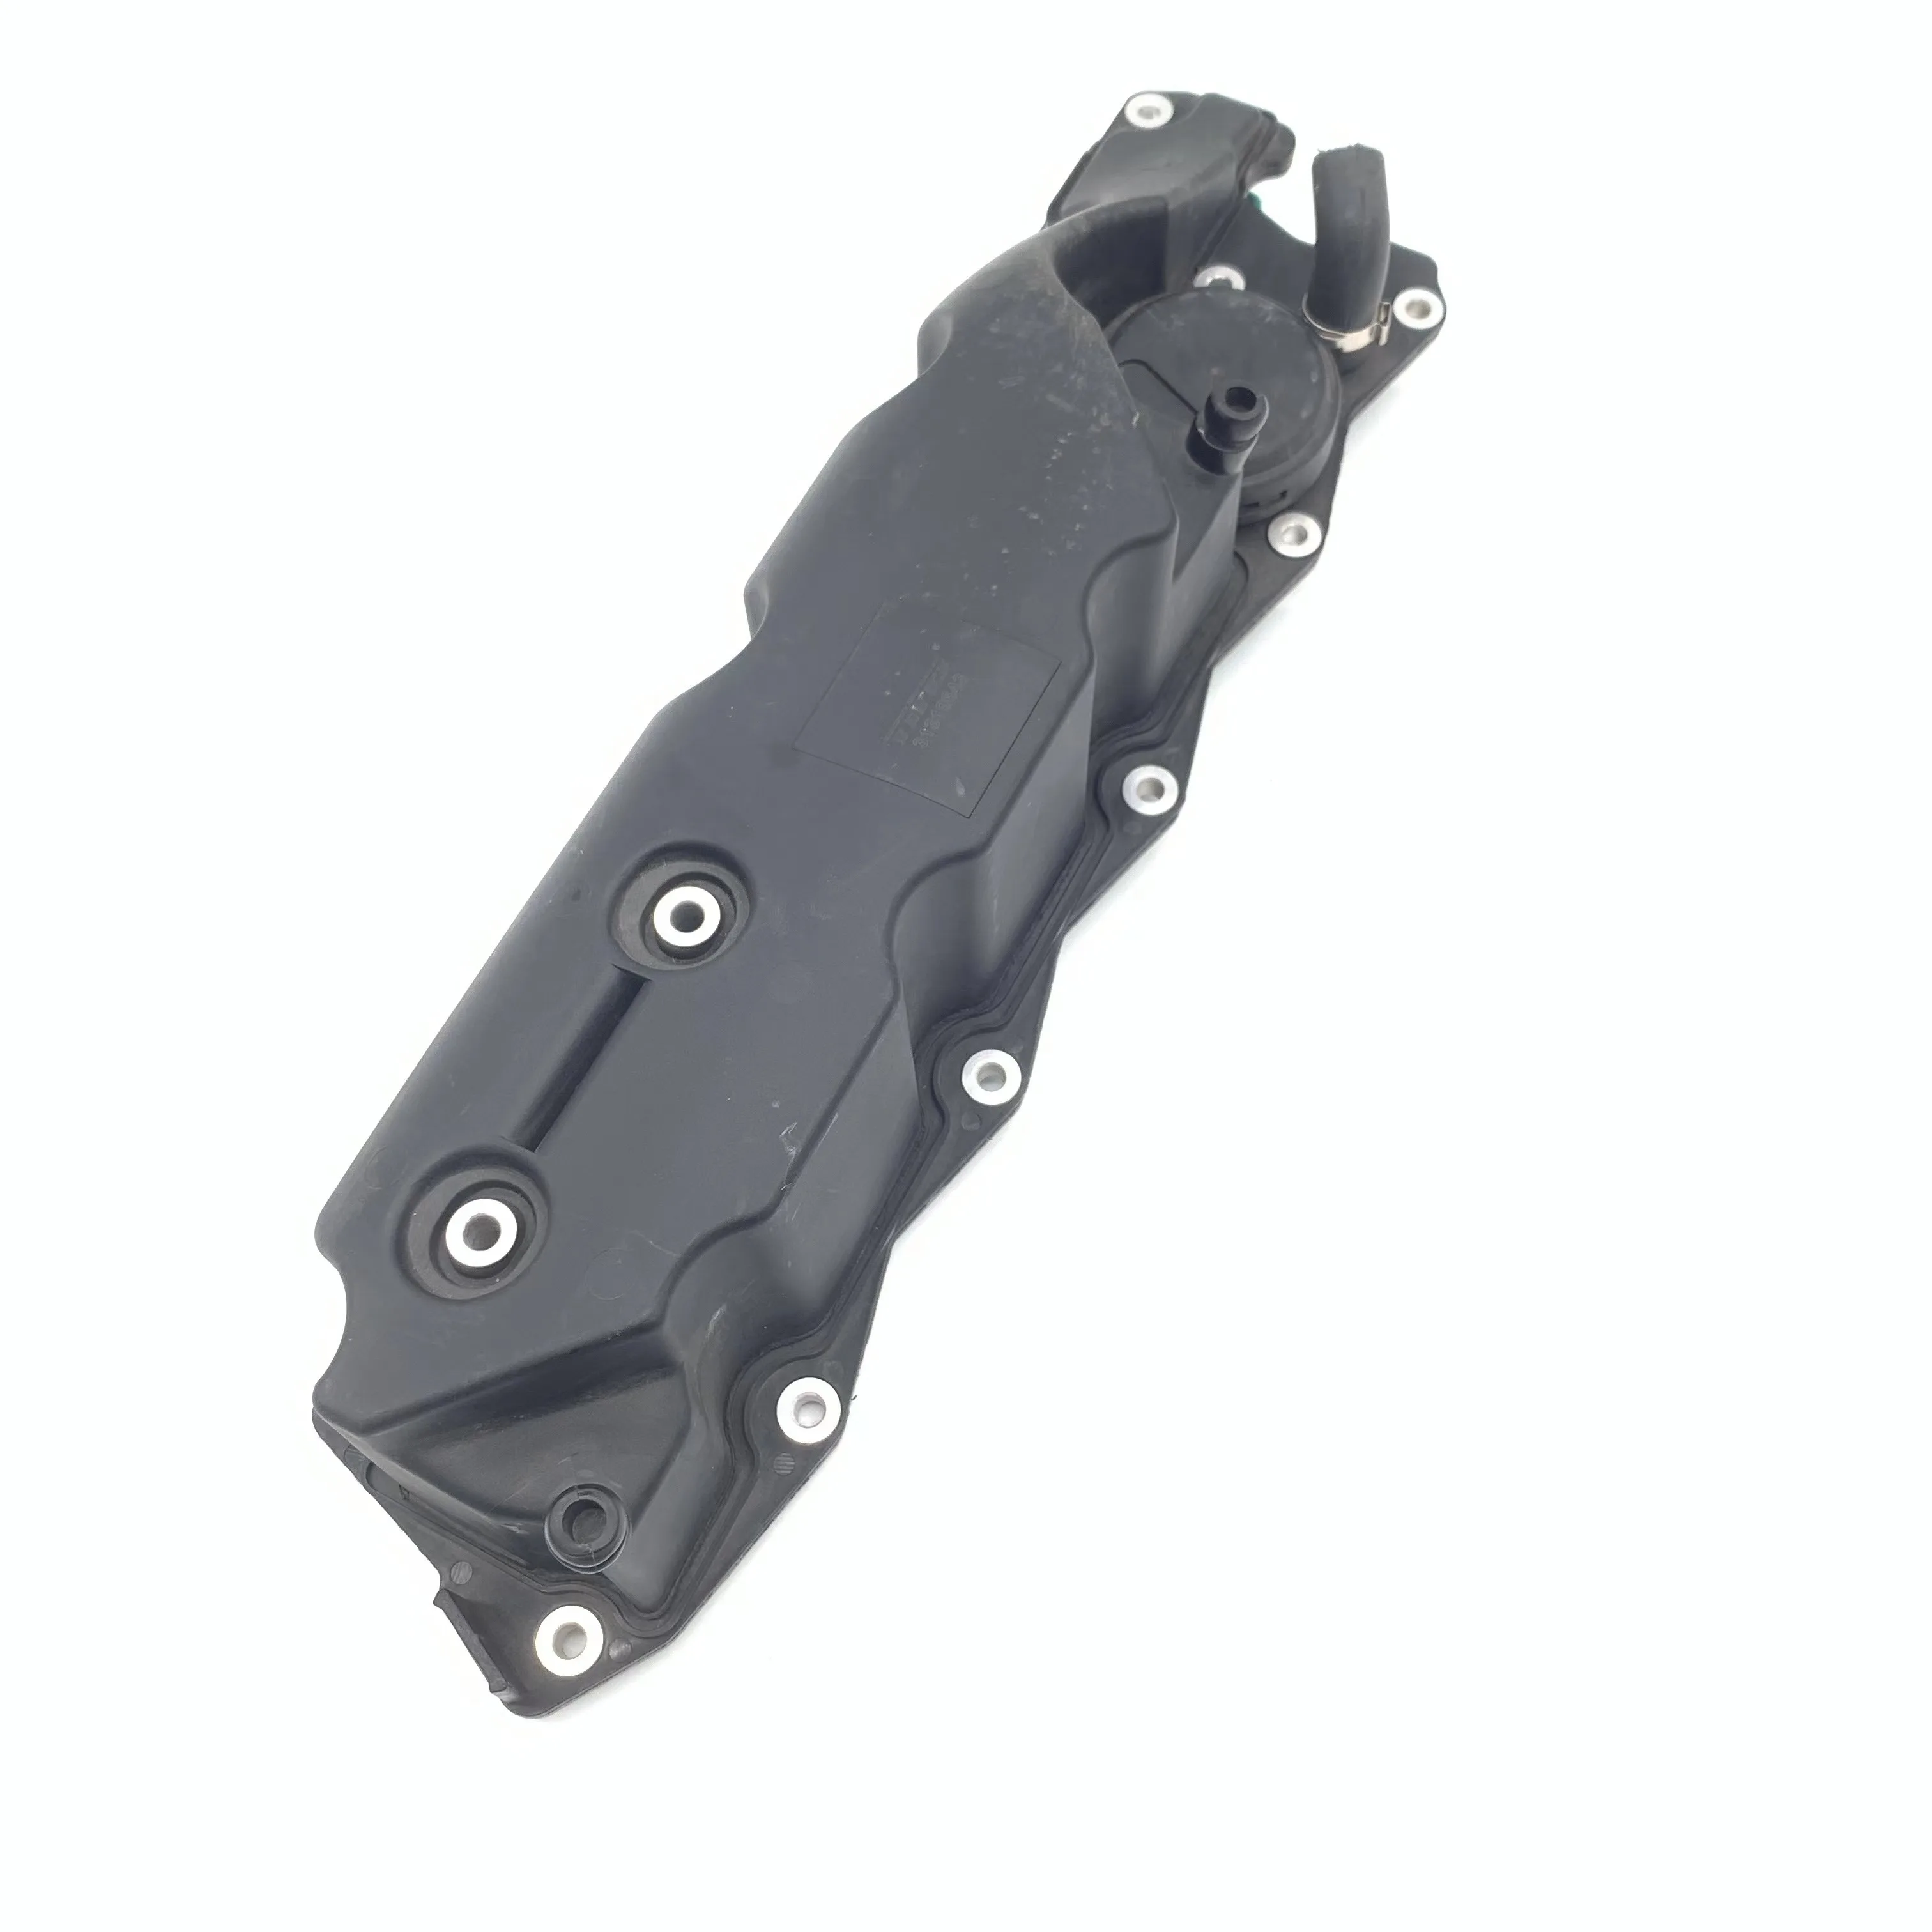 

Car Engine Valve Cover with Gasket for Volvo XC60 XC70 XC90 S80 V70 3.2L PCV Oil Trap with Gasket 31319643